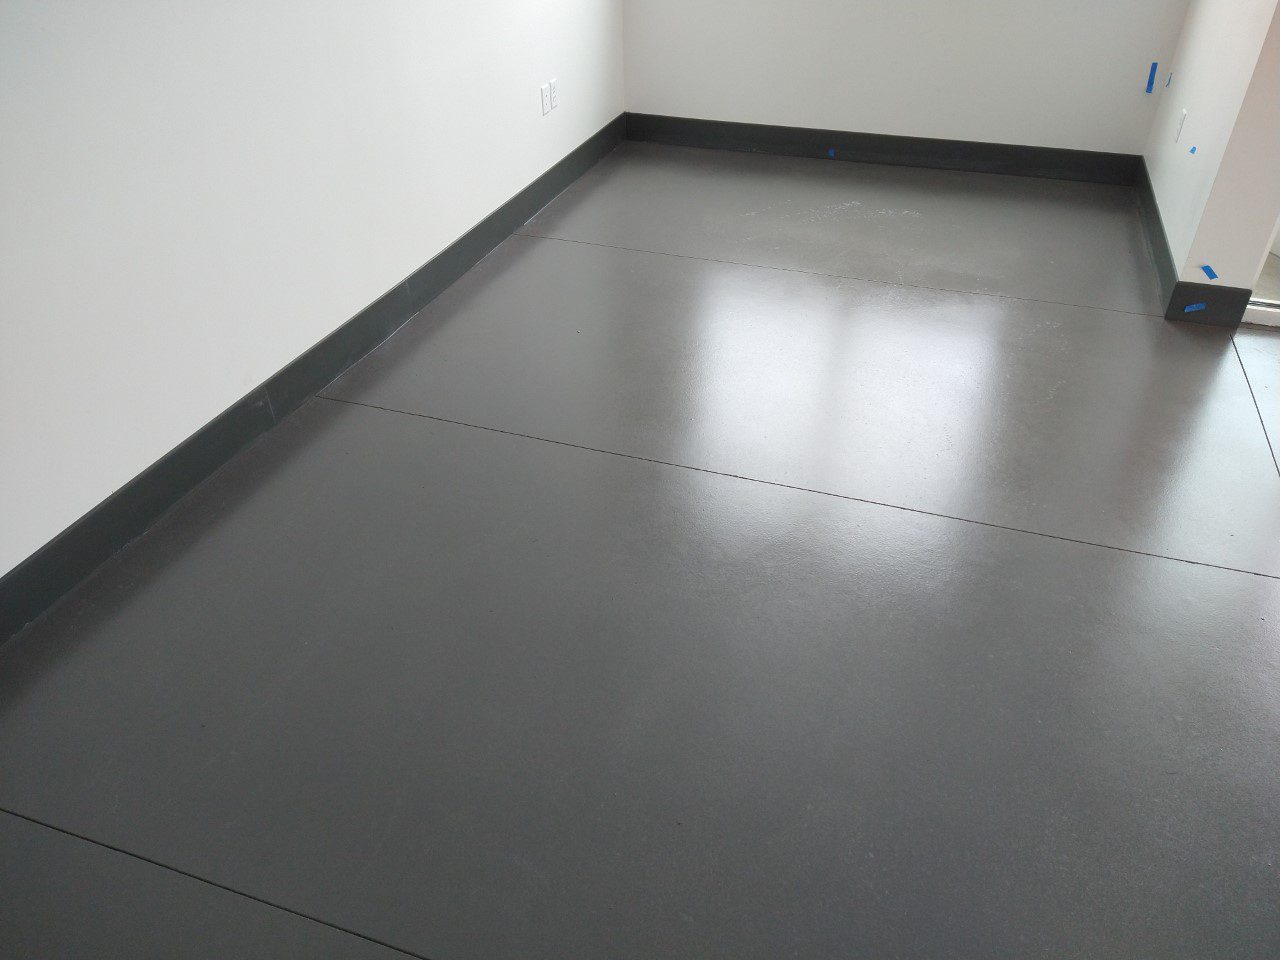 Another view of the revamped commercial floor, showing the sleek finish